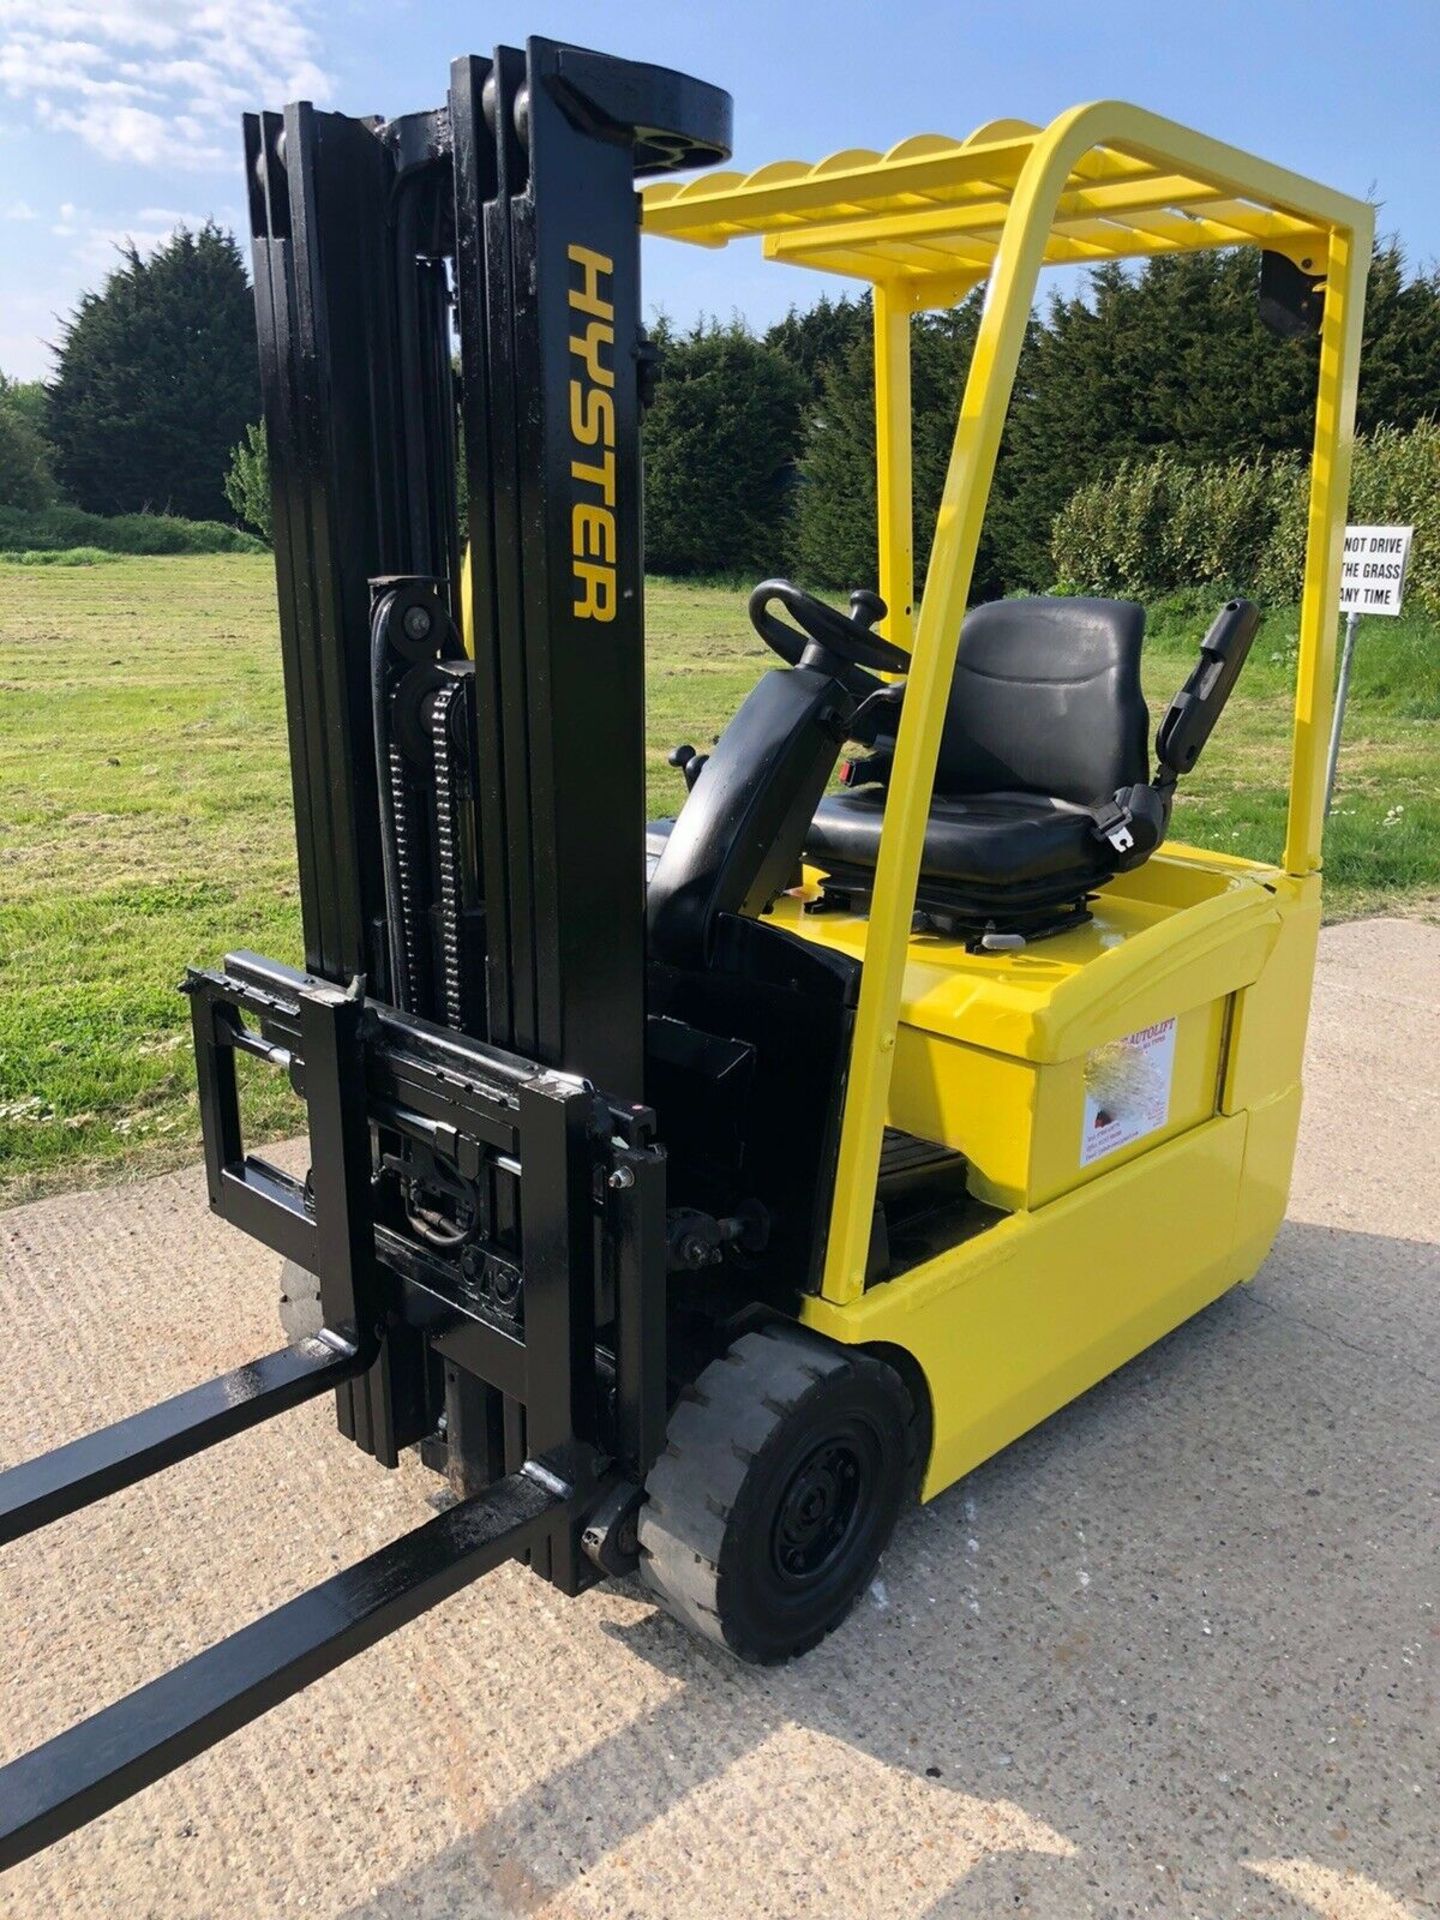 Hyster Electric Forklift Truck - Image 3 of 4